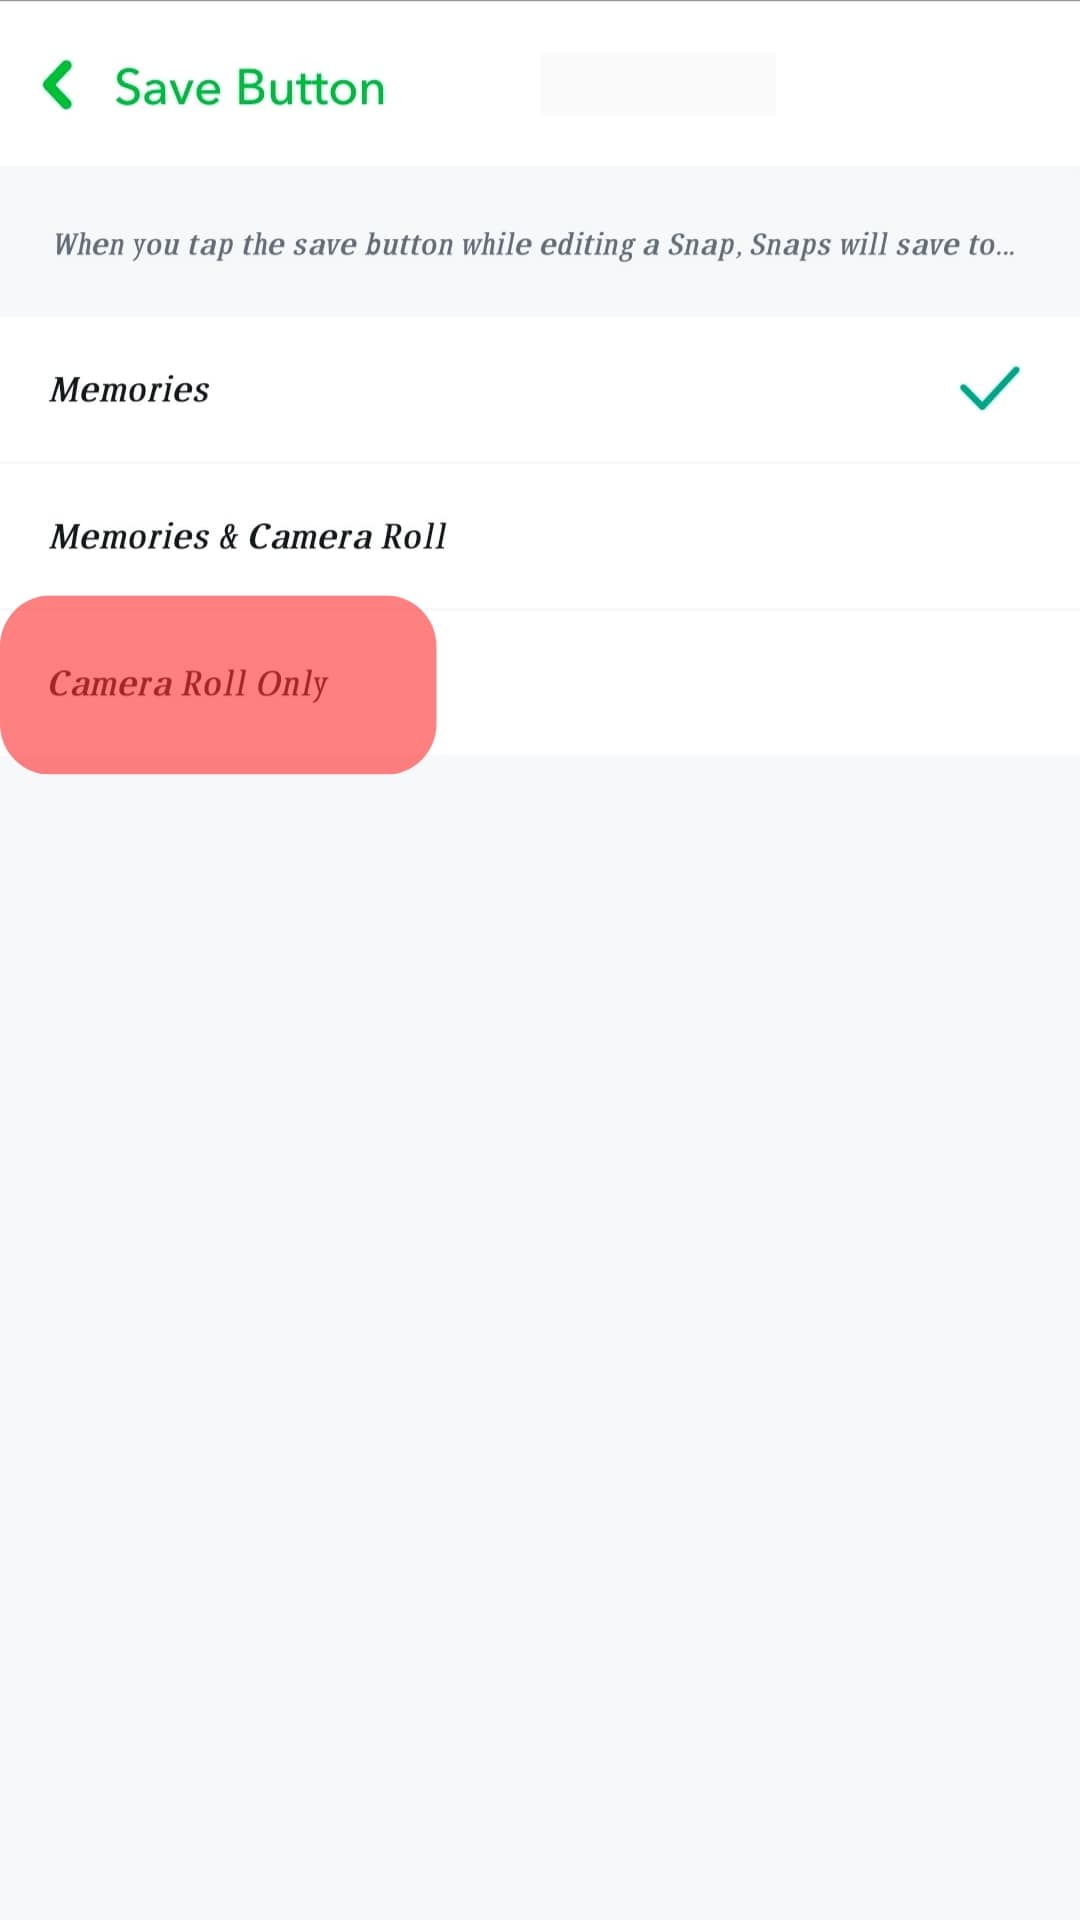 Select Camera Roll Only